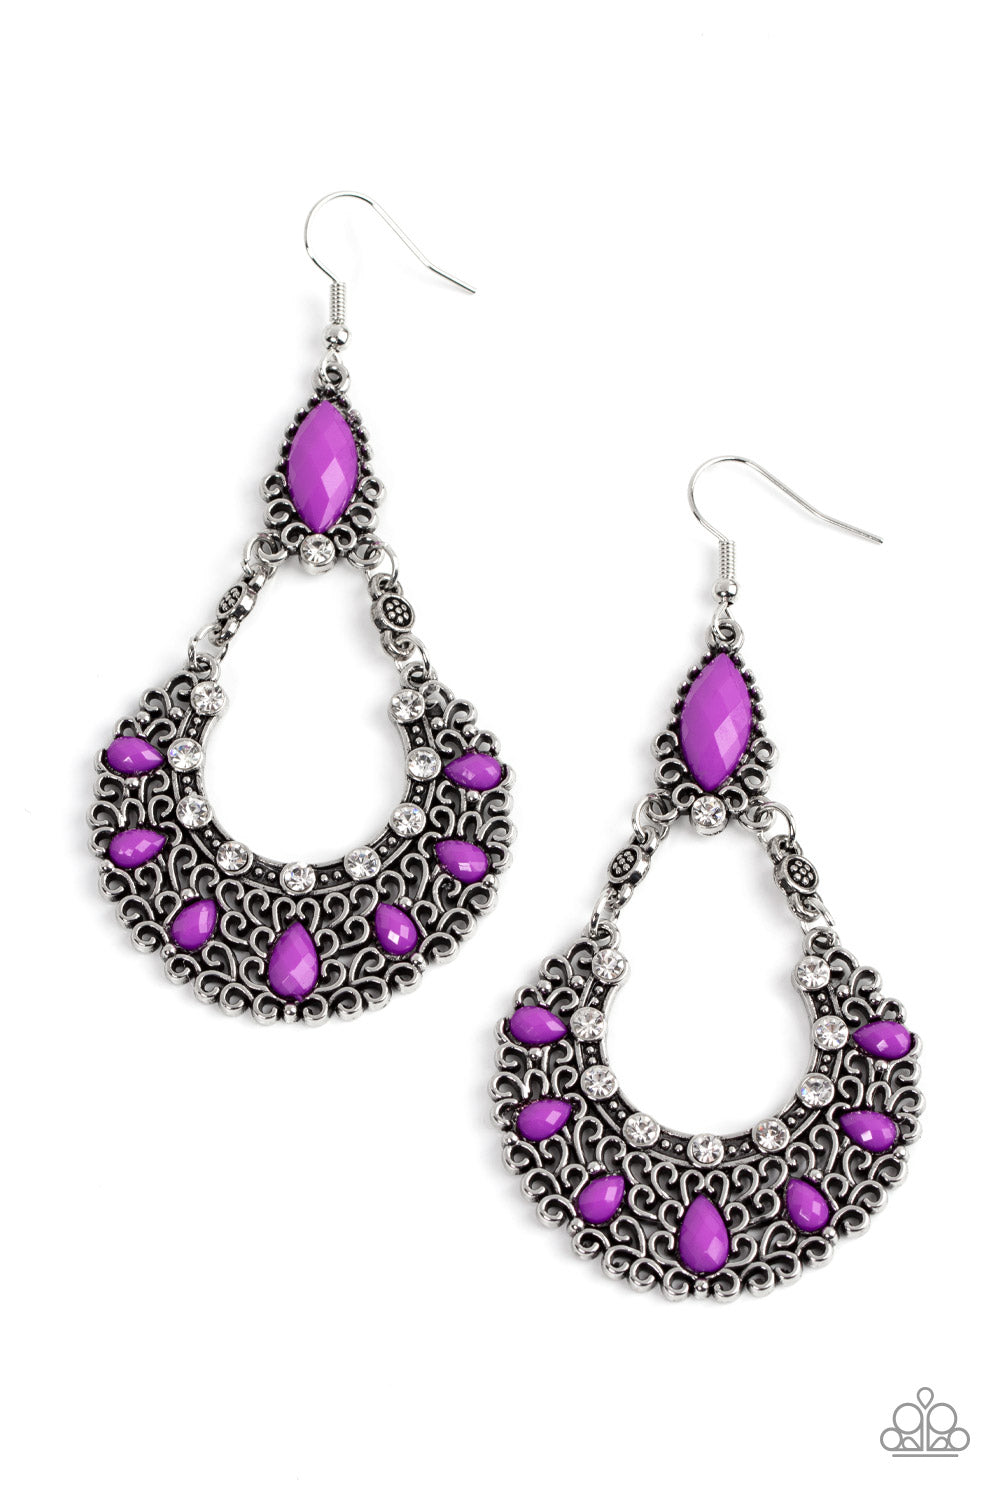 Paparazzi Jewelry & Accessories - Fluent in Florals - Purple Earrings. Bling By Titia Boutique